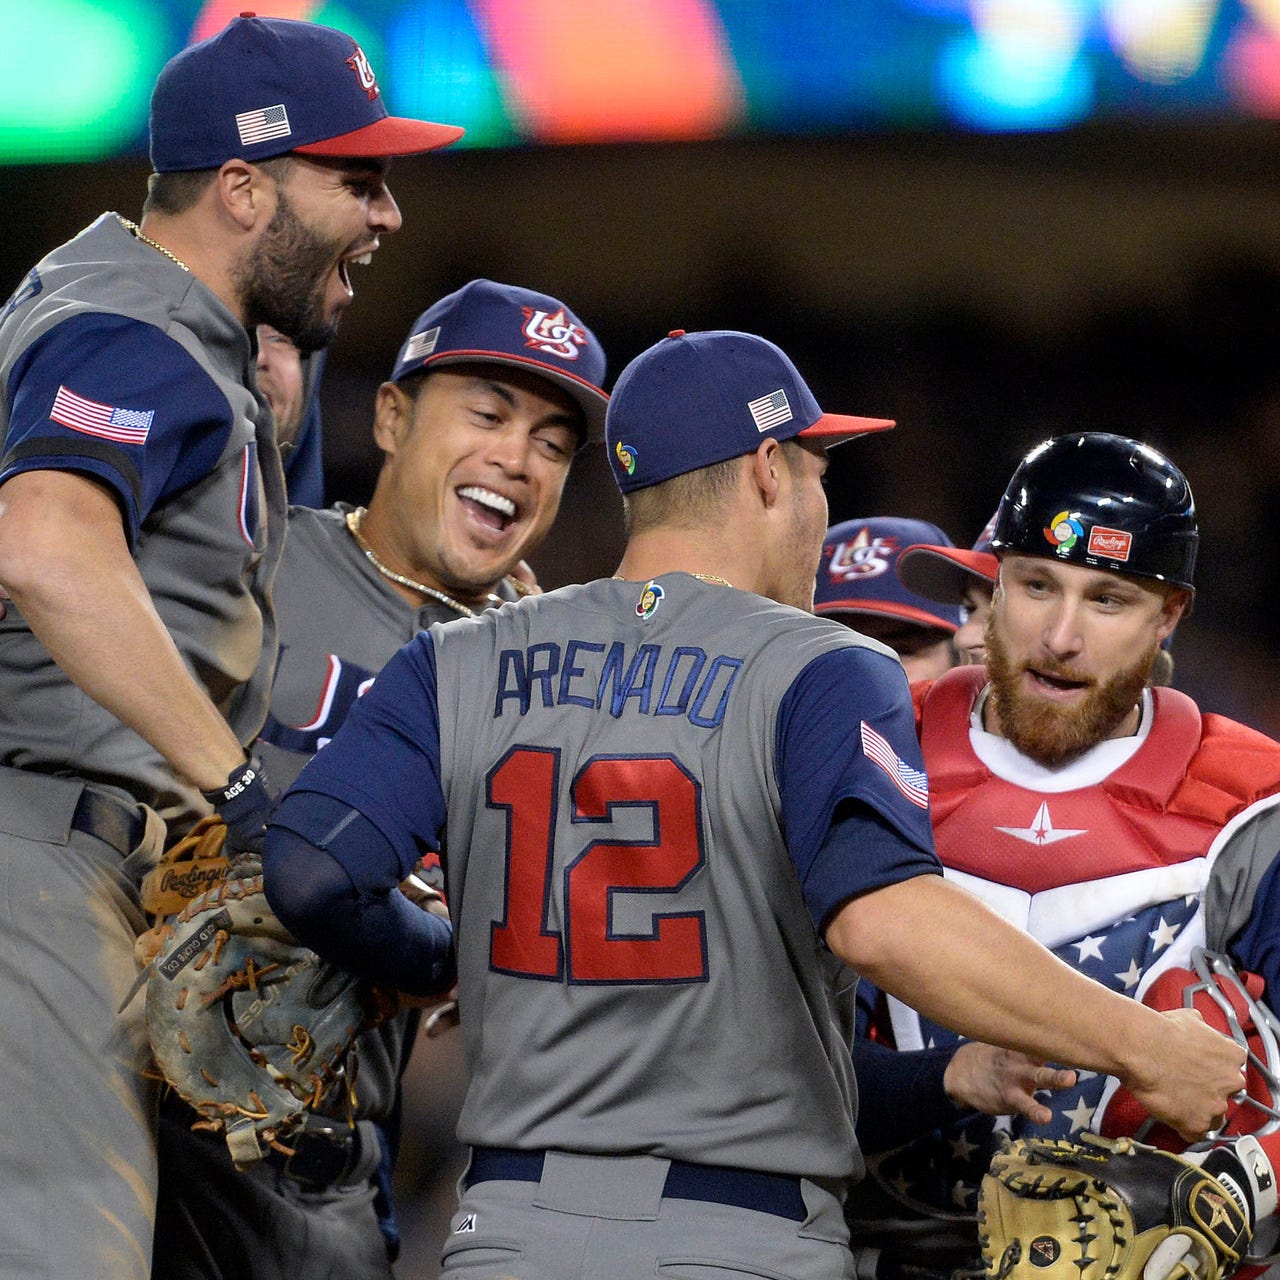 Team USA Begins WBC Title Defense With 6-2 Victory Over Great Britain